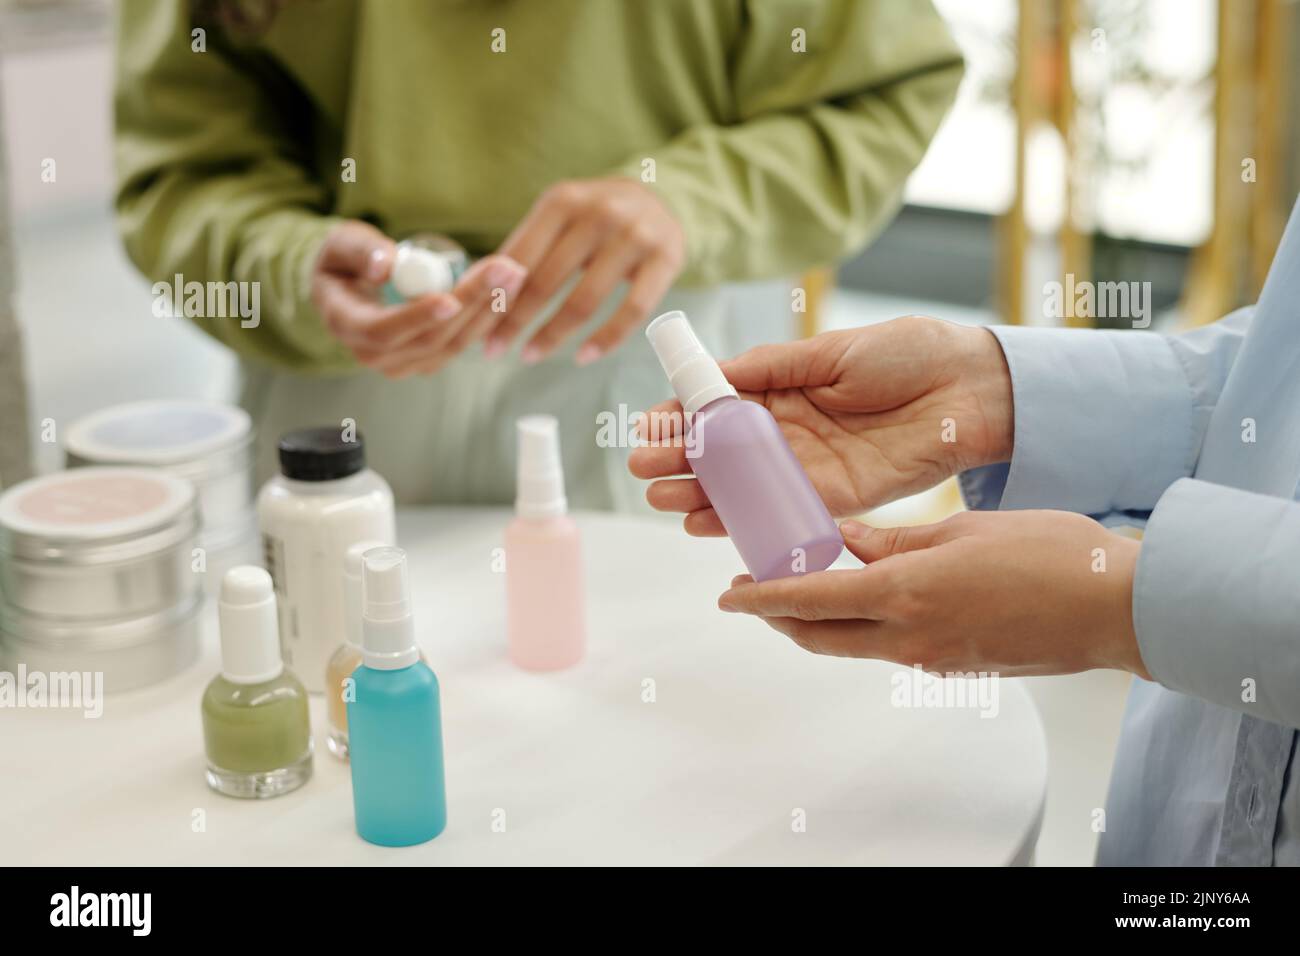 Hands of young female shopper holding plastic bottle with sprayer containing liquid beautycare product while standing by display Stock Photo